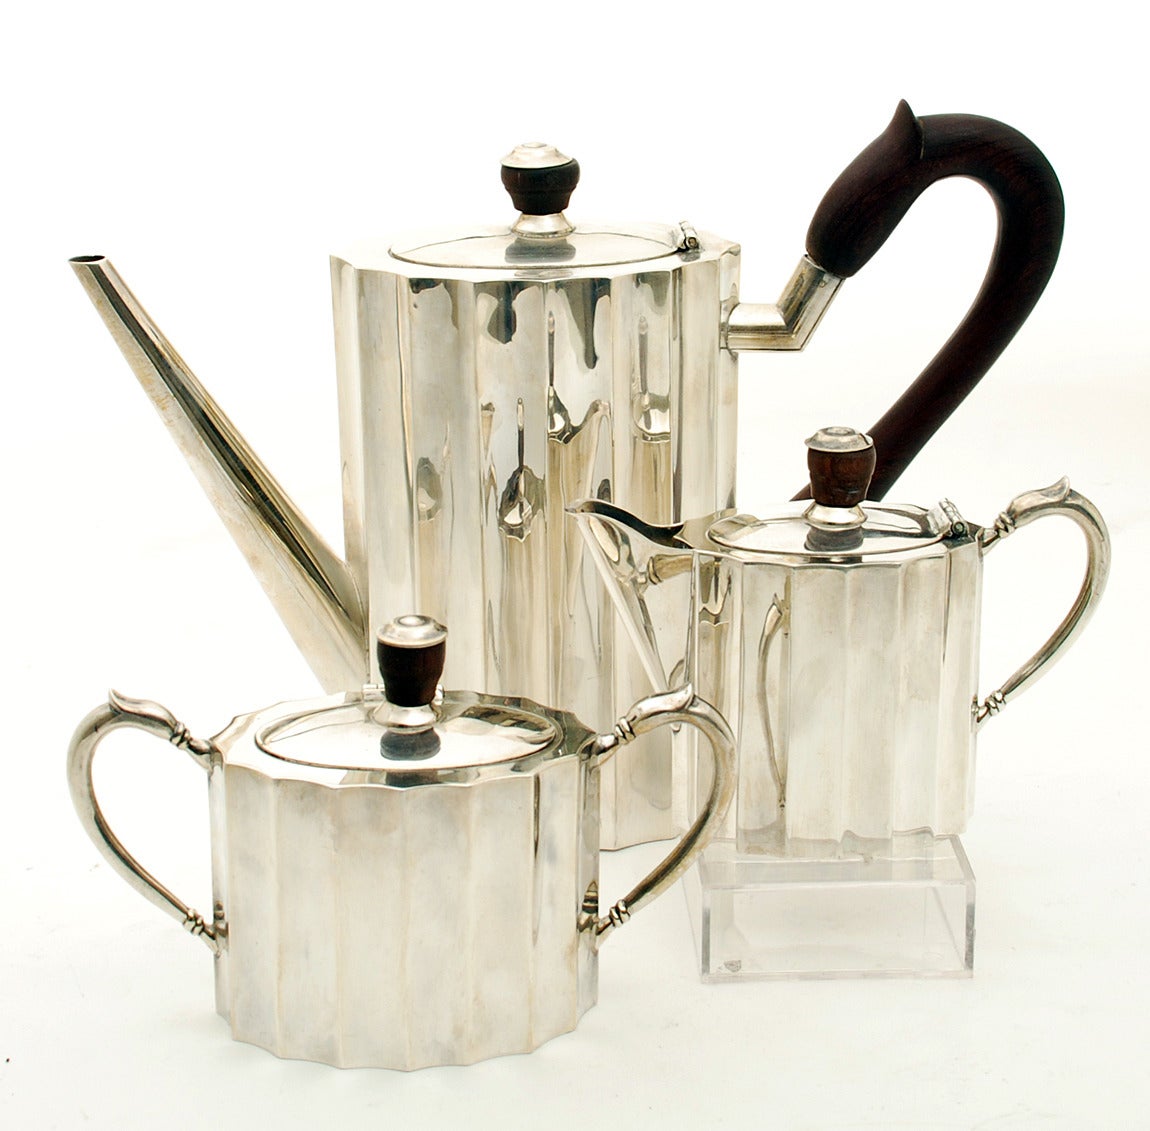 A fine and rare Mexican Art Deco coffee pot, cream and sugar service in sterling silver, circa 1930s-1940s. Each piece in heavy, high quality sterling silver with ribbings, hinged lid and rosewood knobs. The coffee pot with beautiful handcrafted